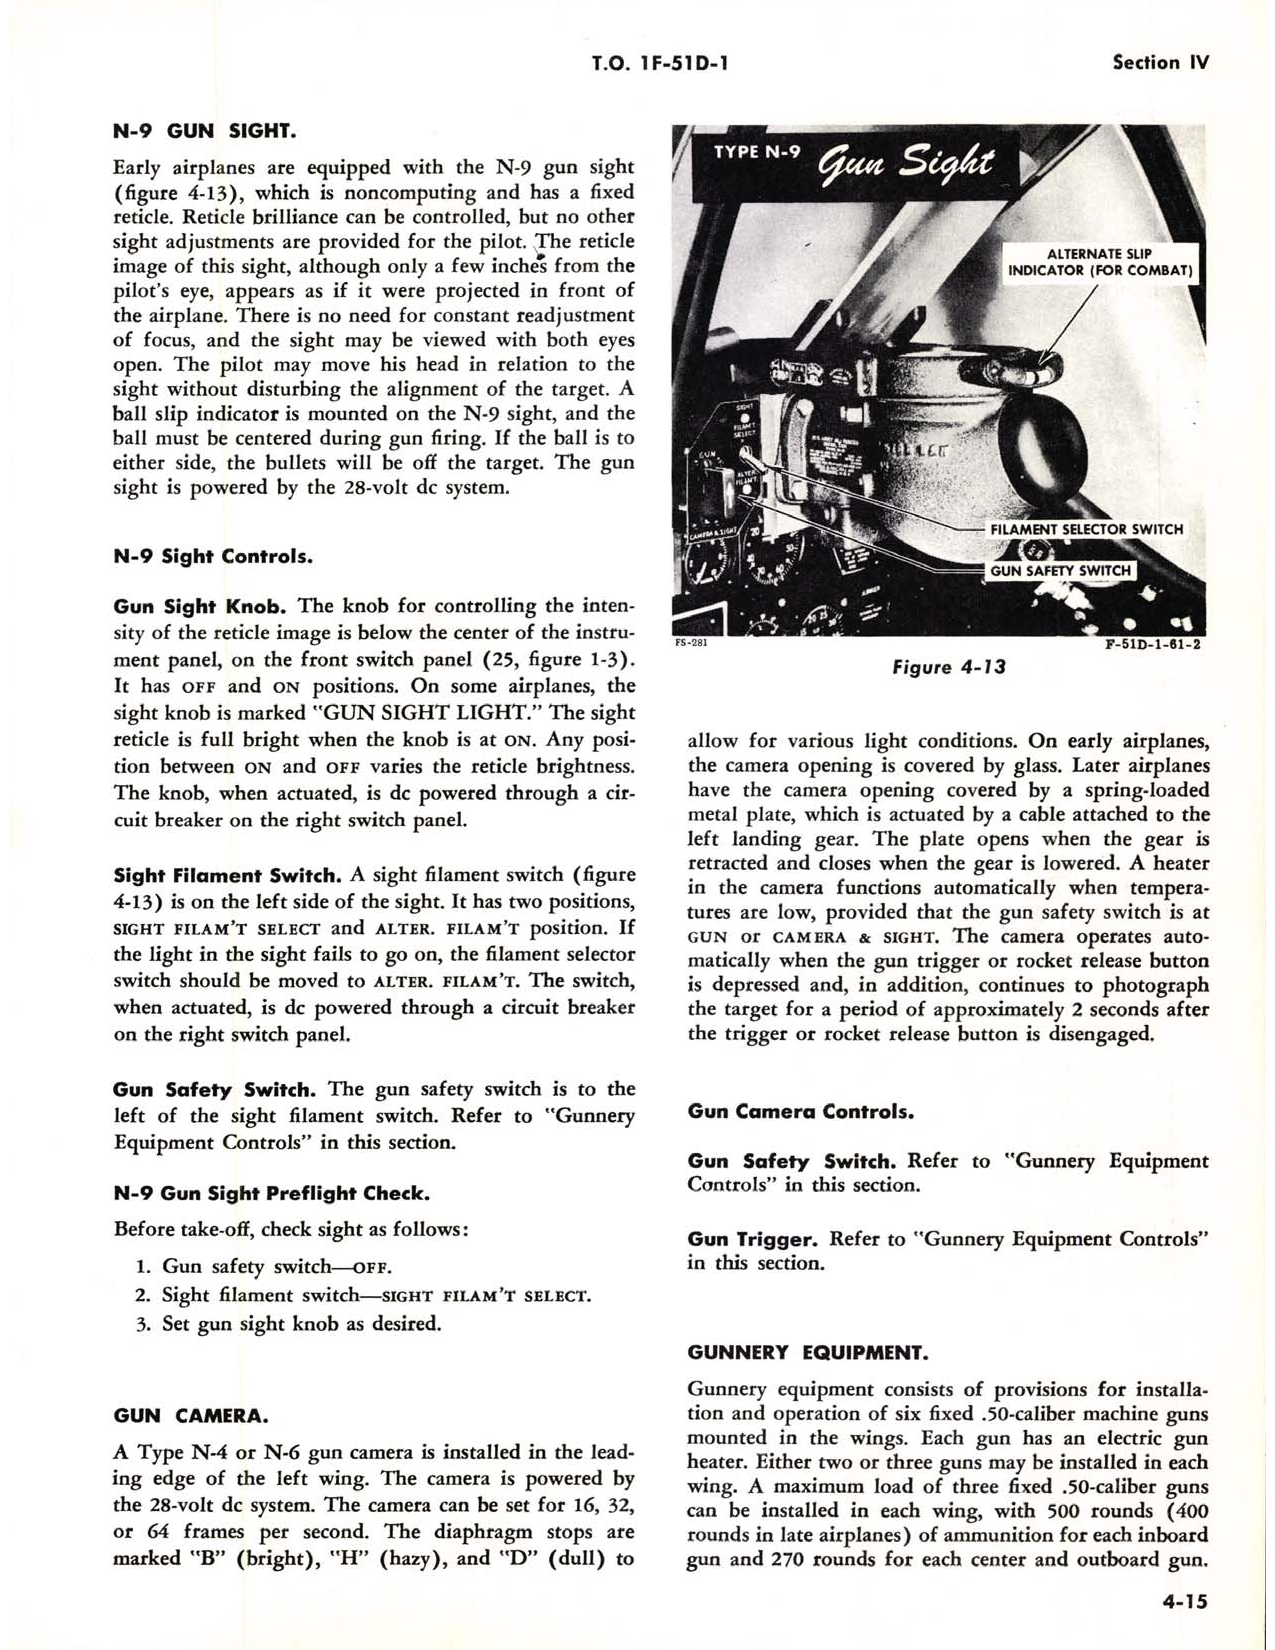 Sample page 75 from AirCorps Library document: Flight Handbook F-51D